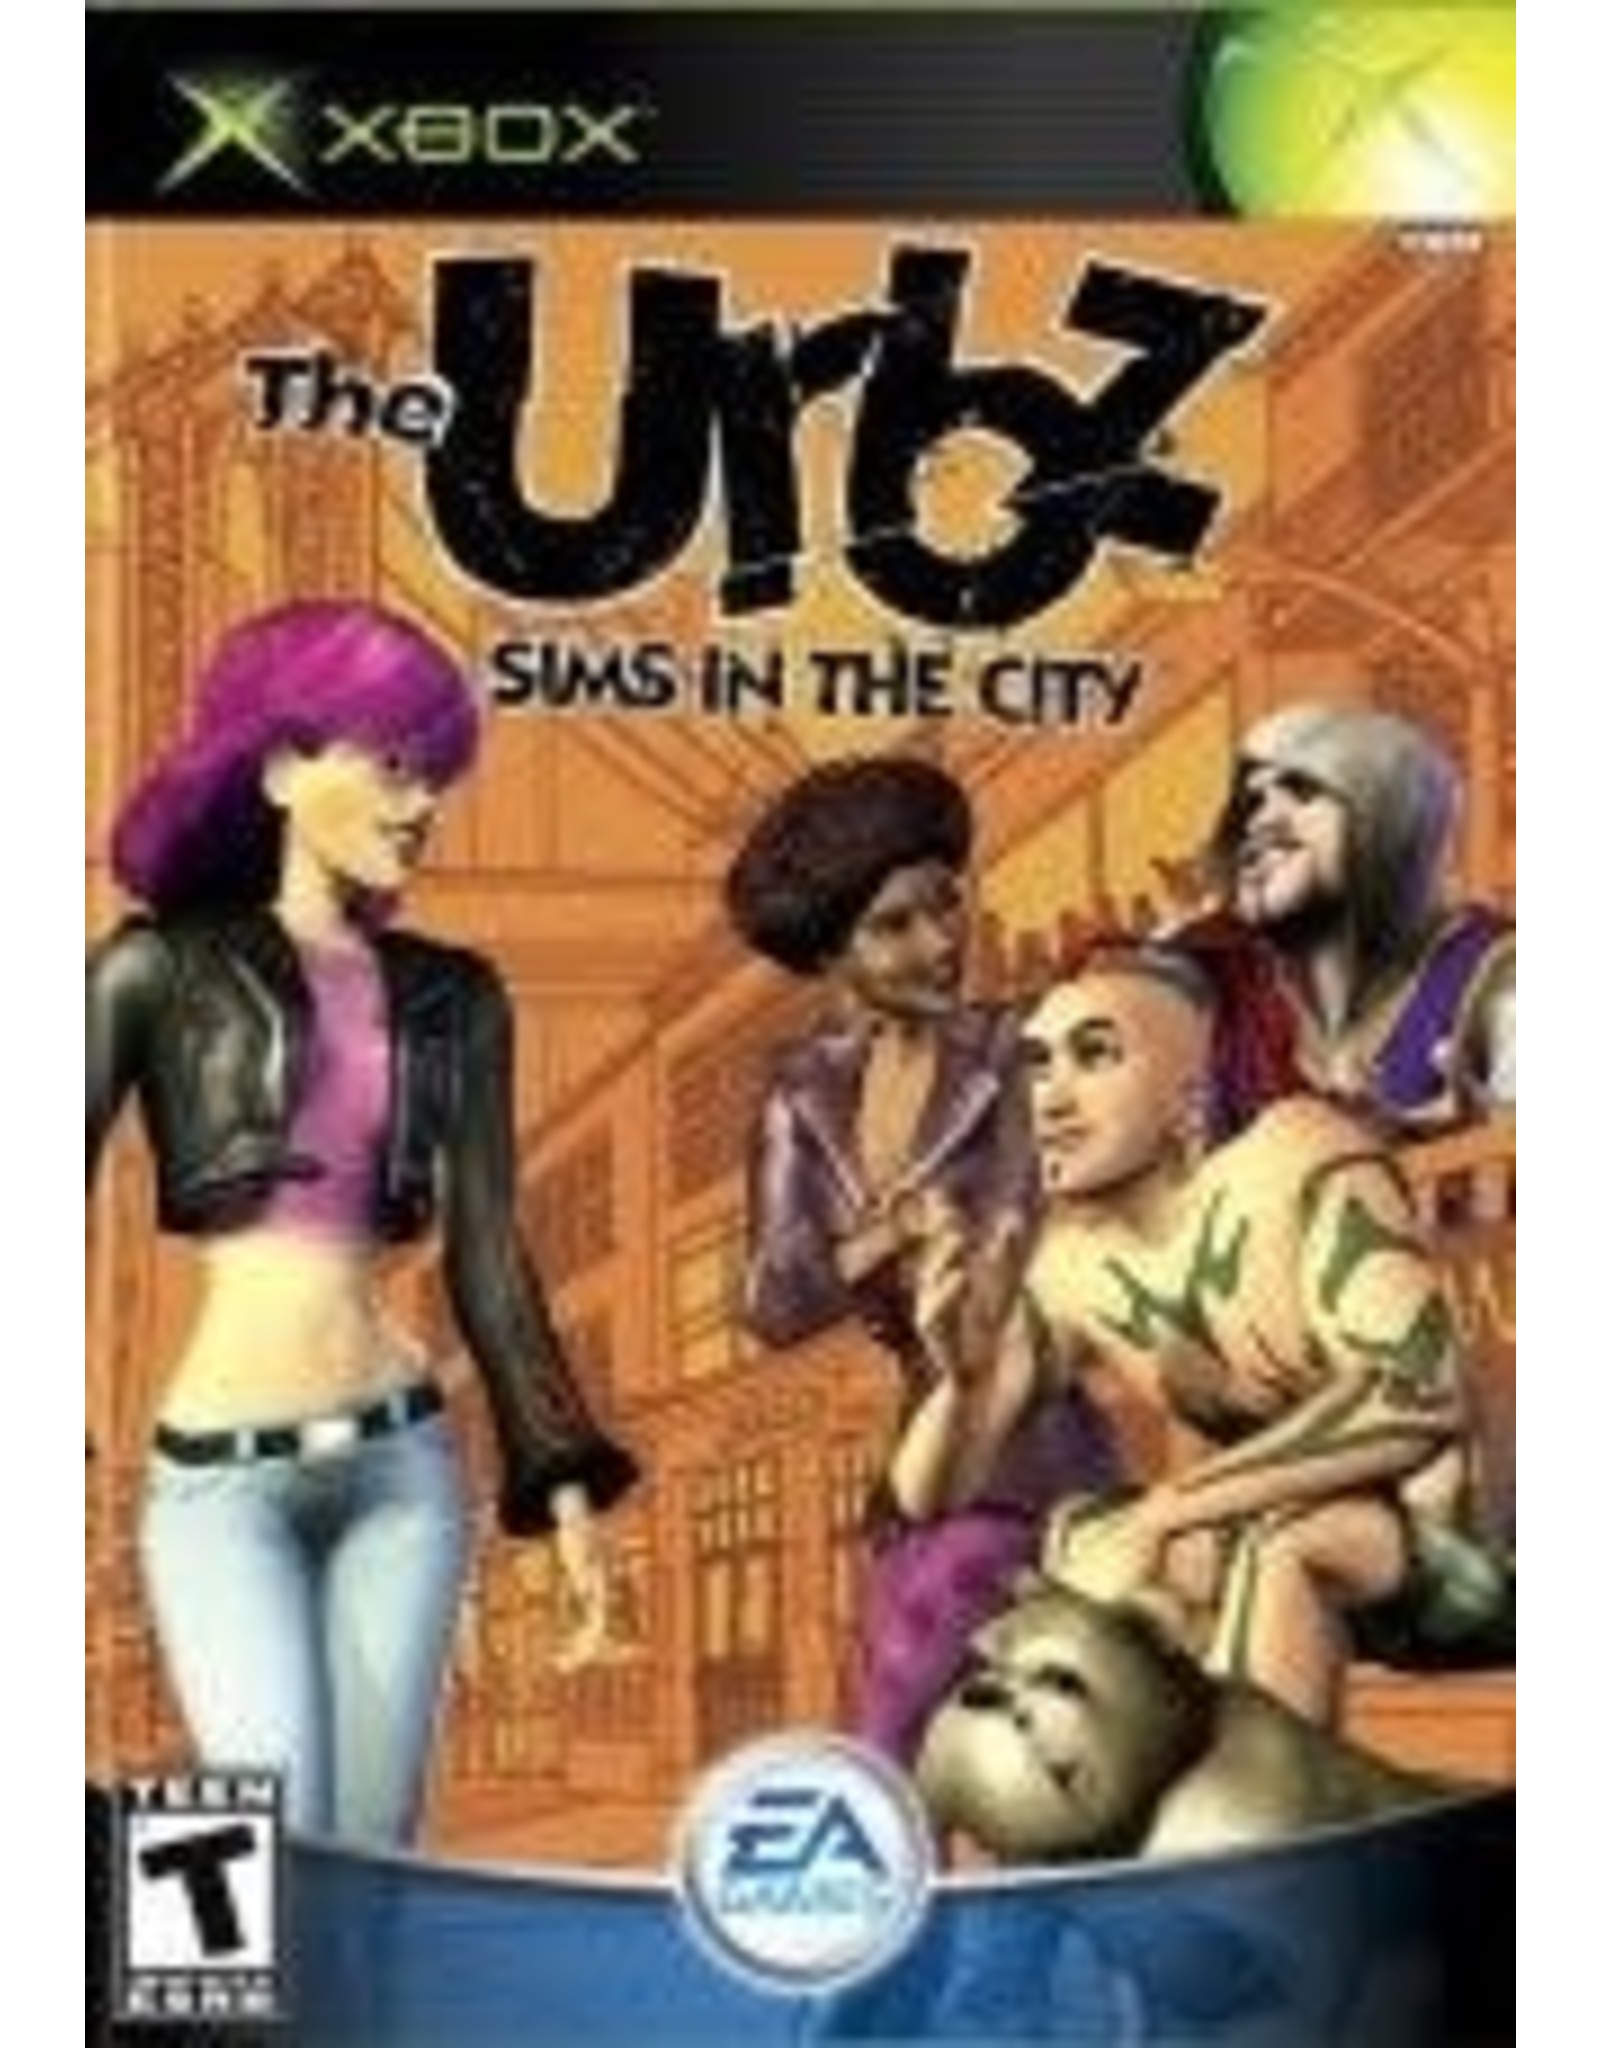 Xbox Urbz Sims in the City, The (No Manual)